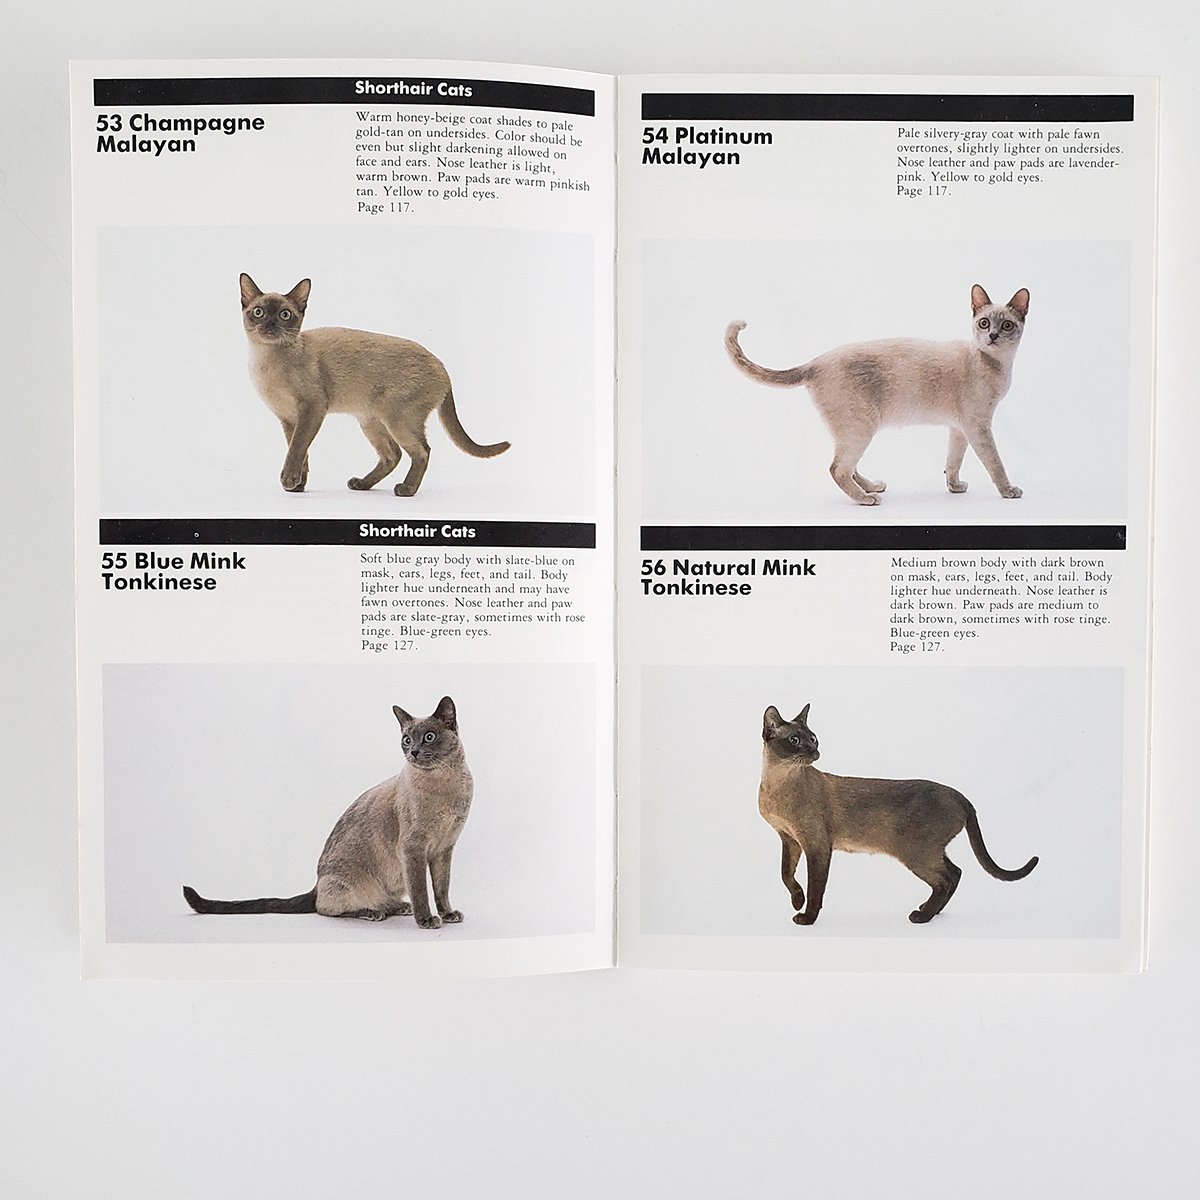 What better time to reflect on the 80s than on #Internationalcatday! Harper's Illust. Handbook of #Cats, #design by #Vignelli, 1985. #everybreed #Archvies80s #ArchivesHashtagParty #designarchives #bookdesign More: bit.ly/2nlwTcz